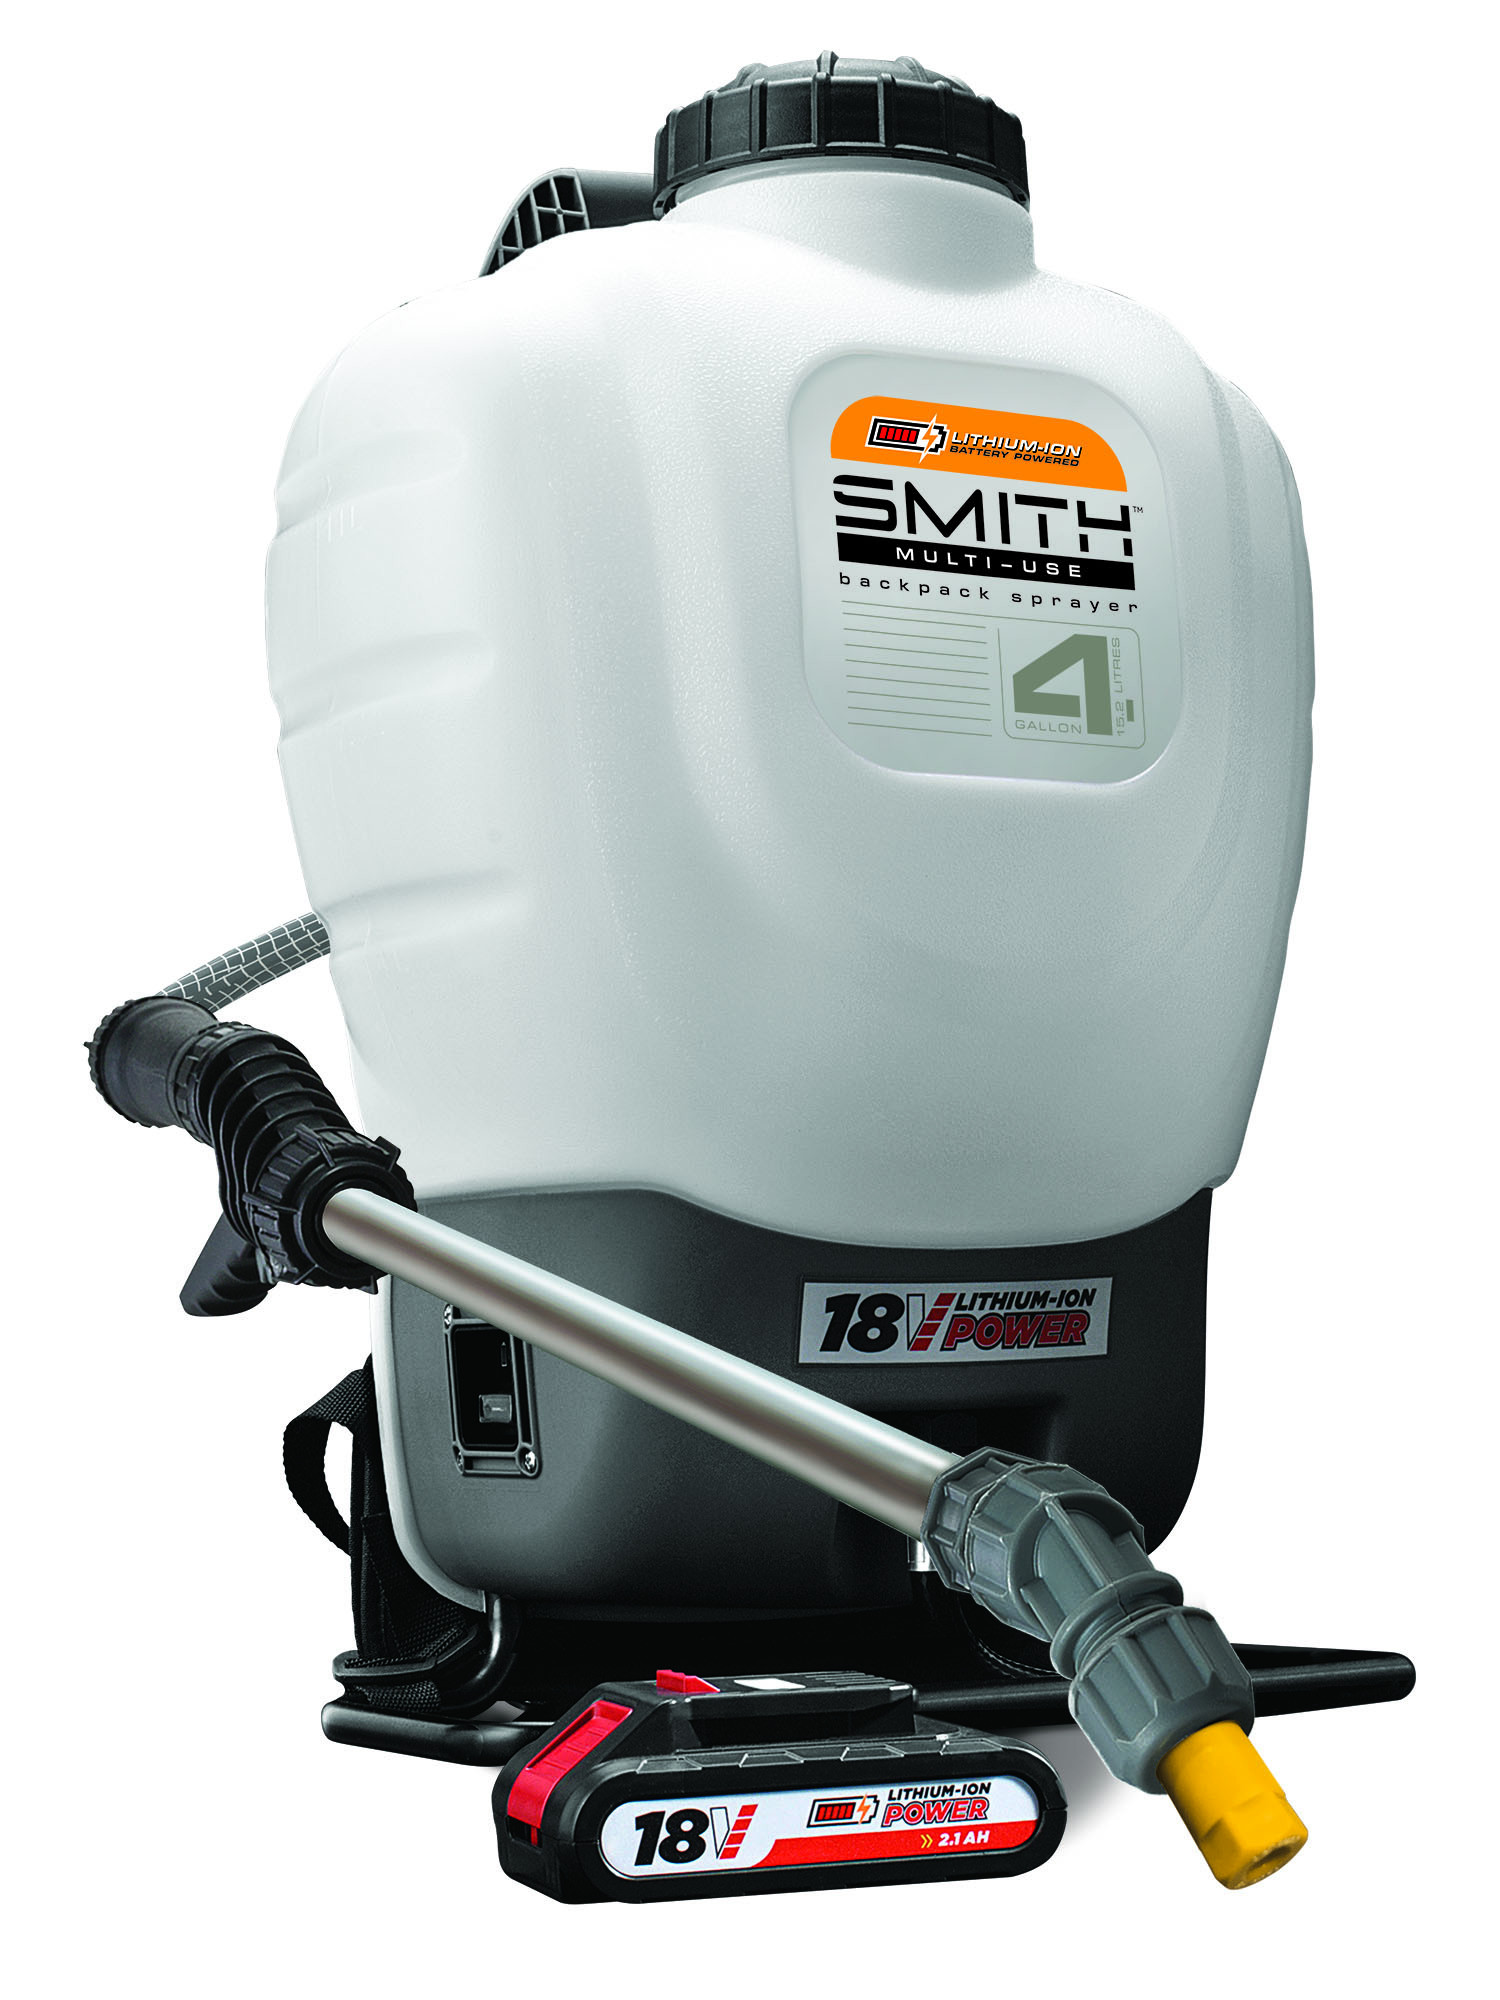 Smith Multi-Use 18V Lithium-ion Powered Disinfecting Backpack Sprayer, Model 190676